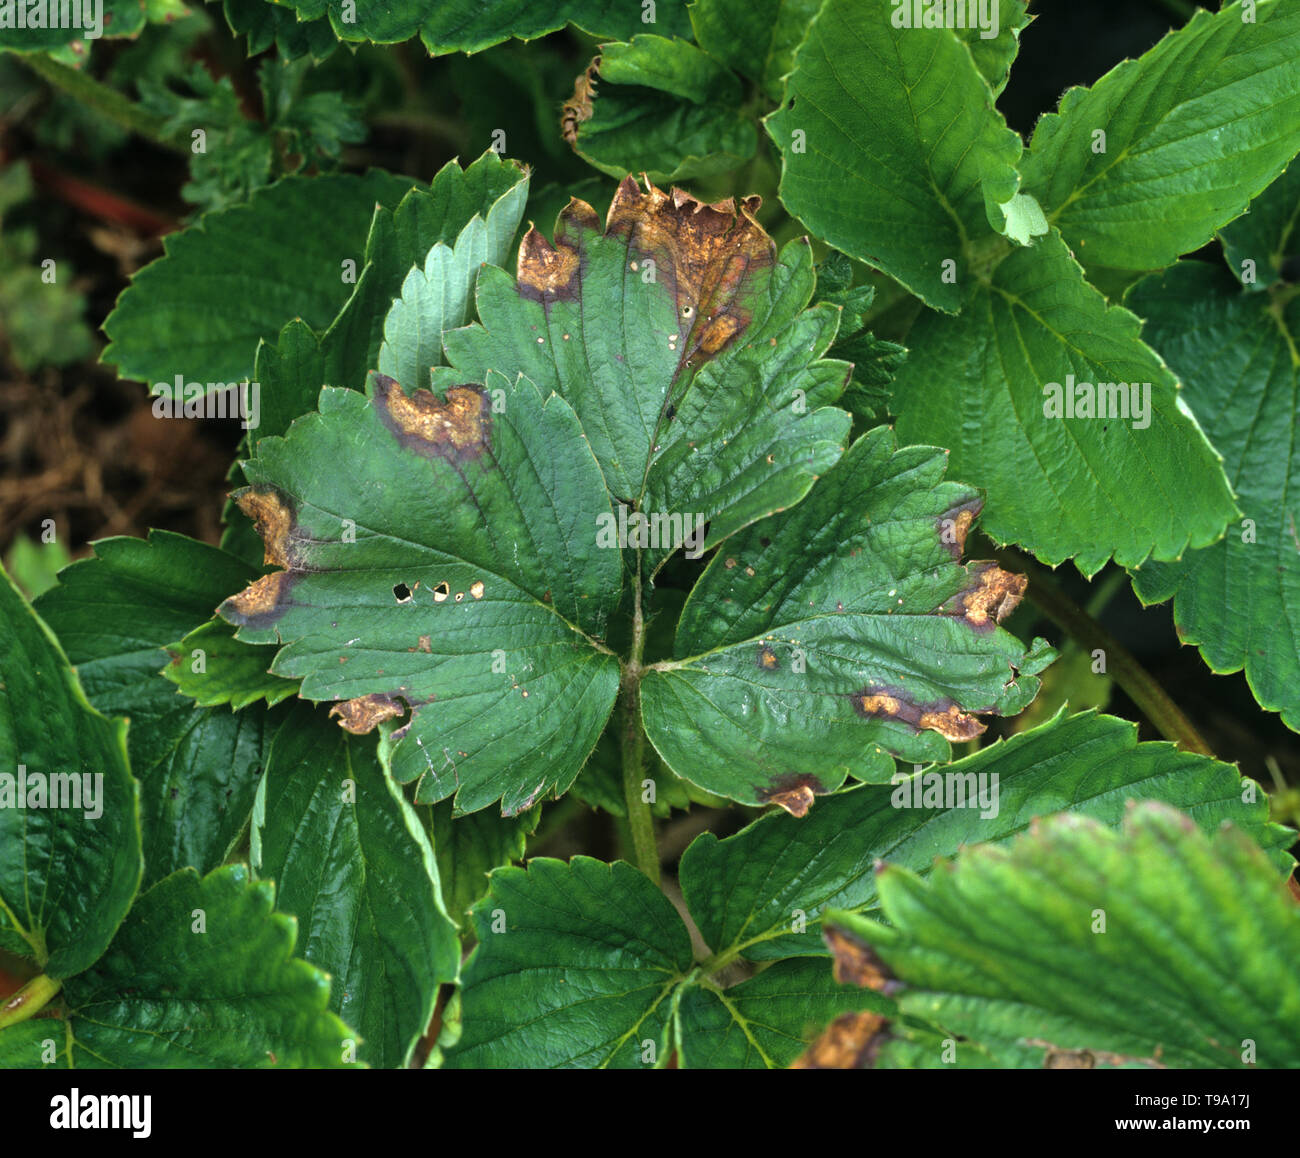 Leaf blight (Phomopsis obscurans)  common fungal disease causing a V-shaped lesions at the leaf edge  with pycnidia on a strawberry leaf Stock Photo